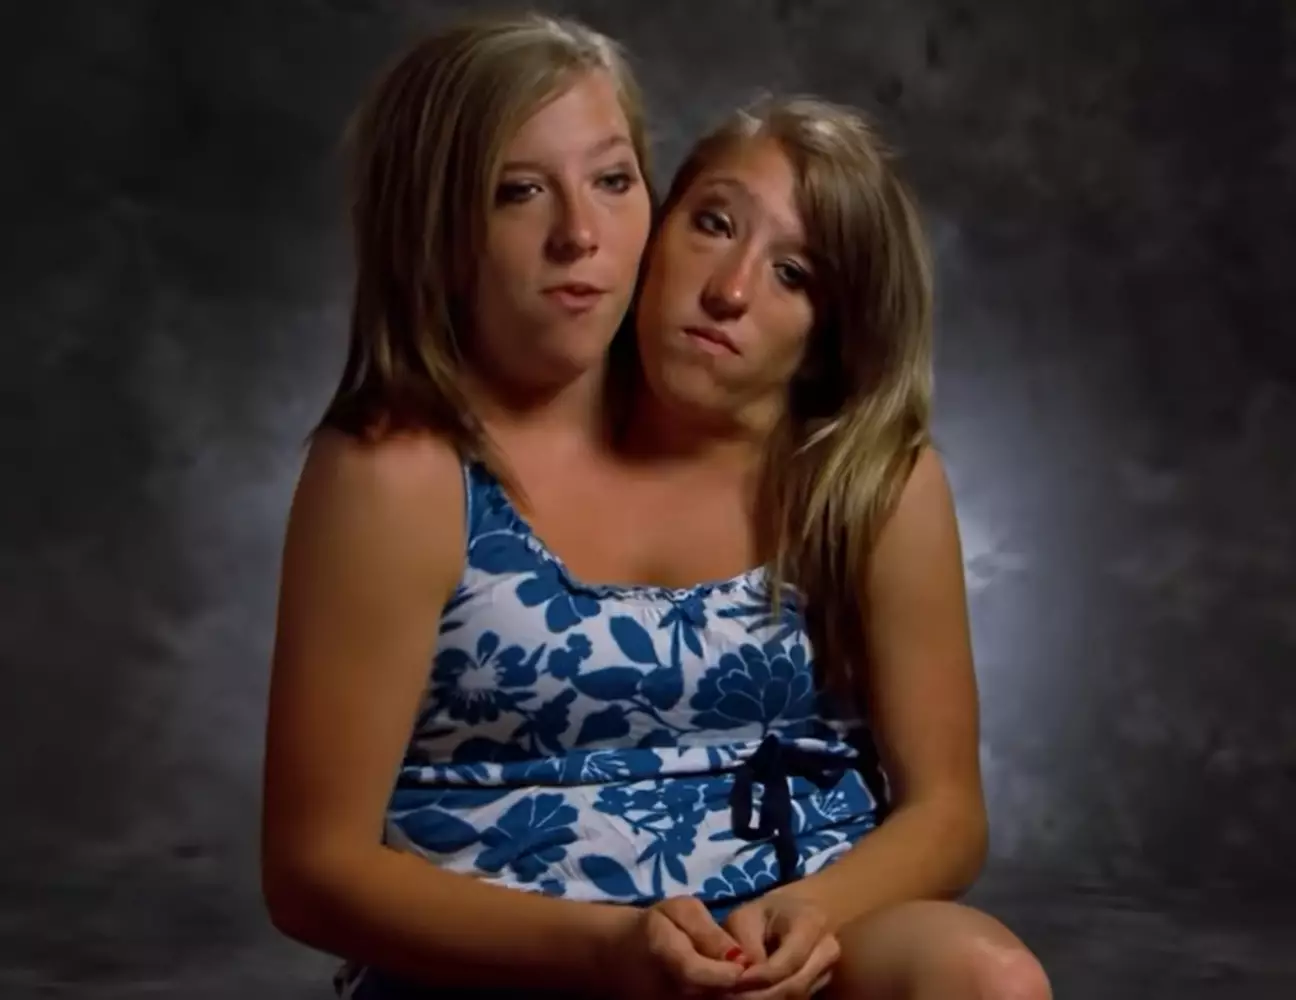 Conjoined twins opened up on what their life was like after